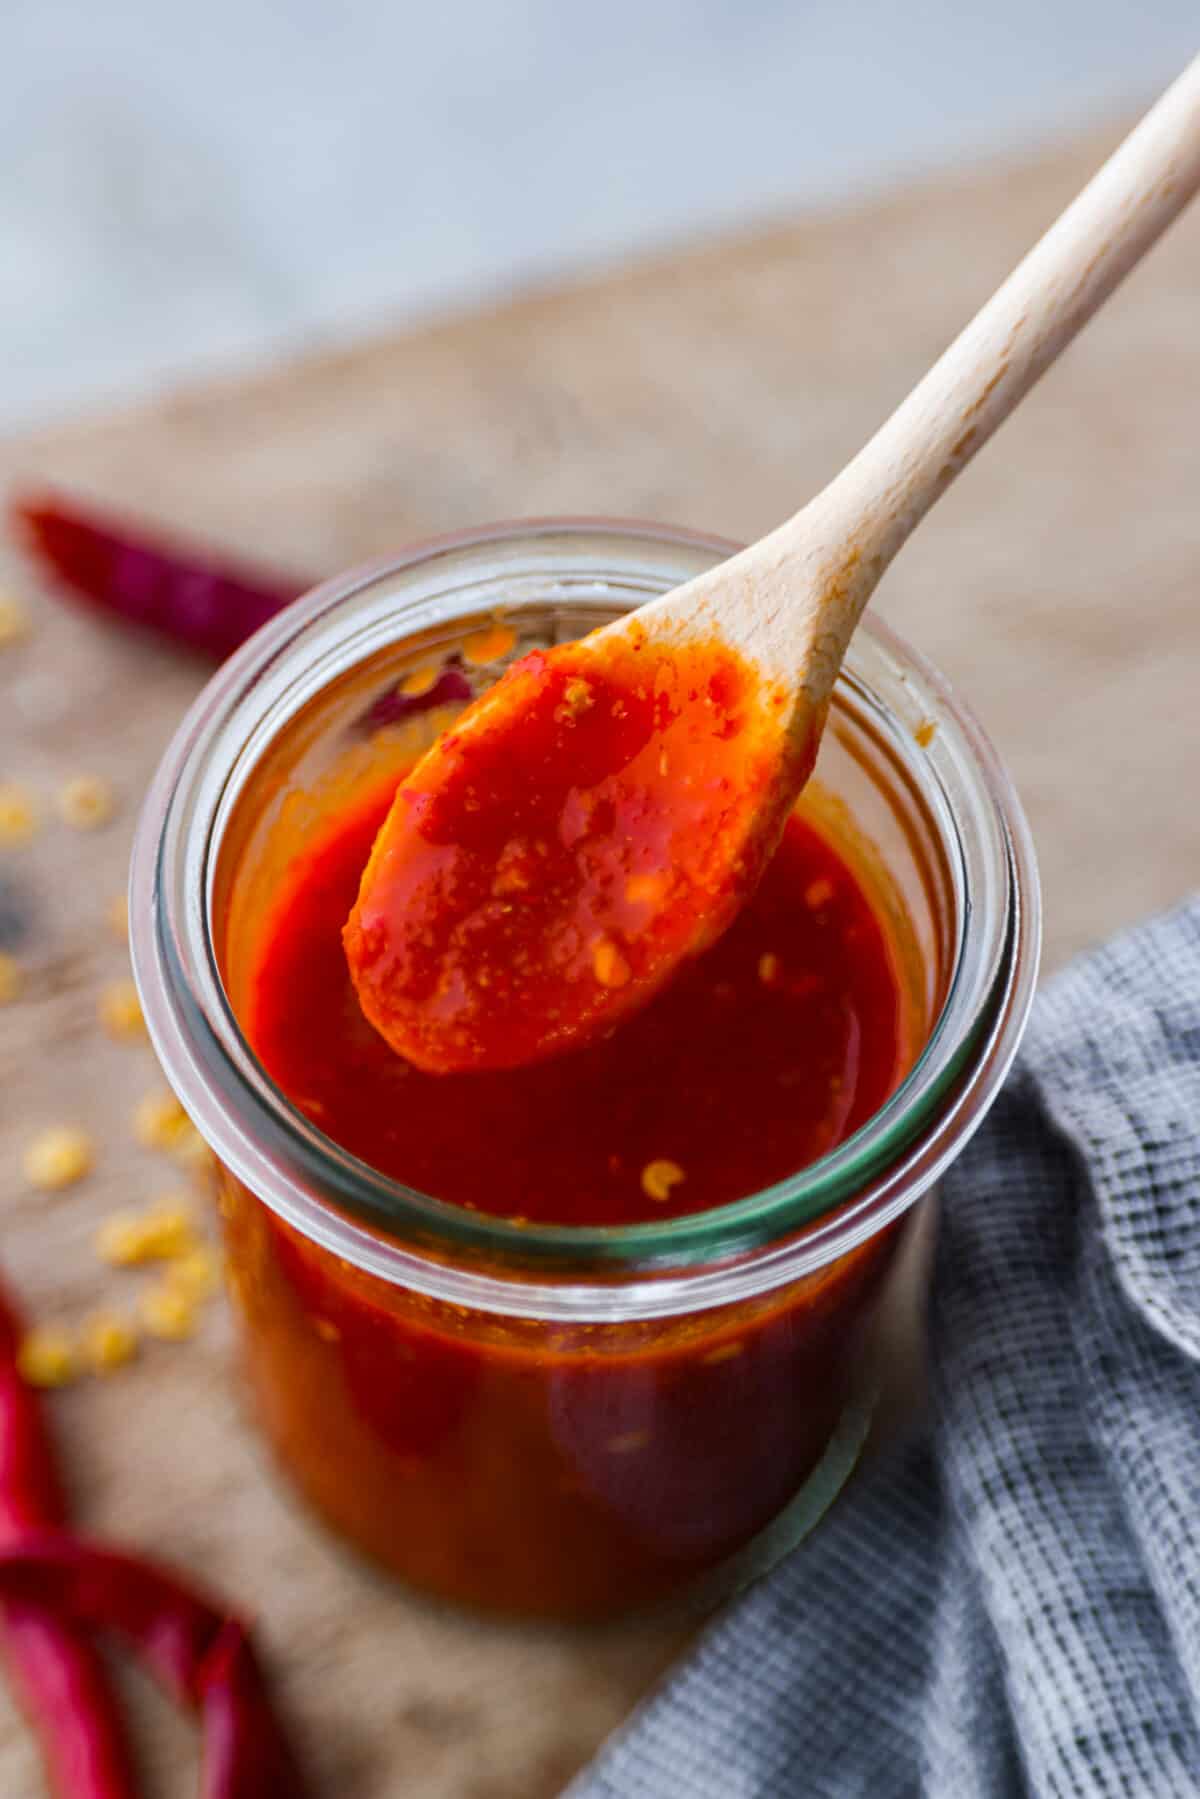 Homemade hot sauce in glass jar, being mixed with a wooden spoon.